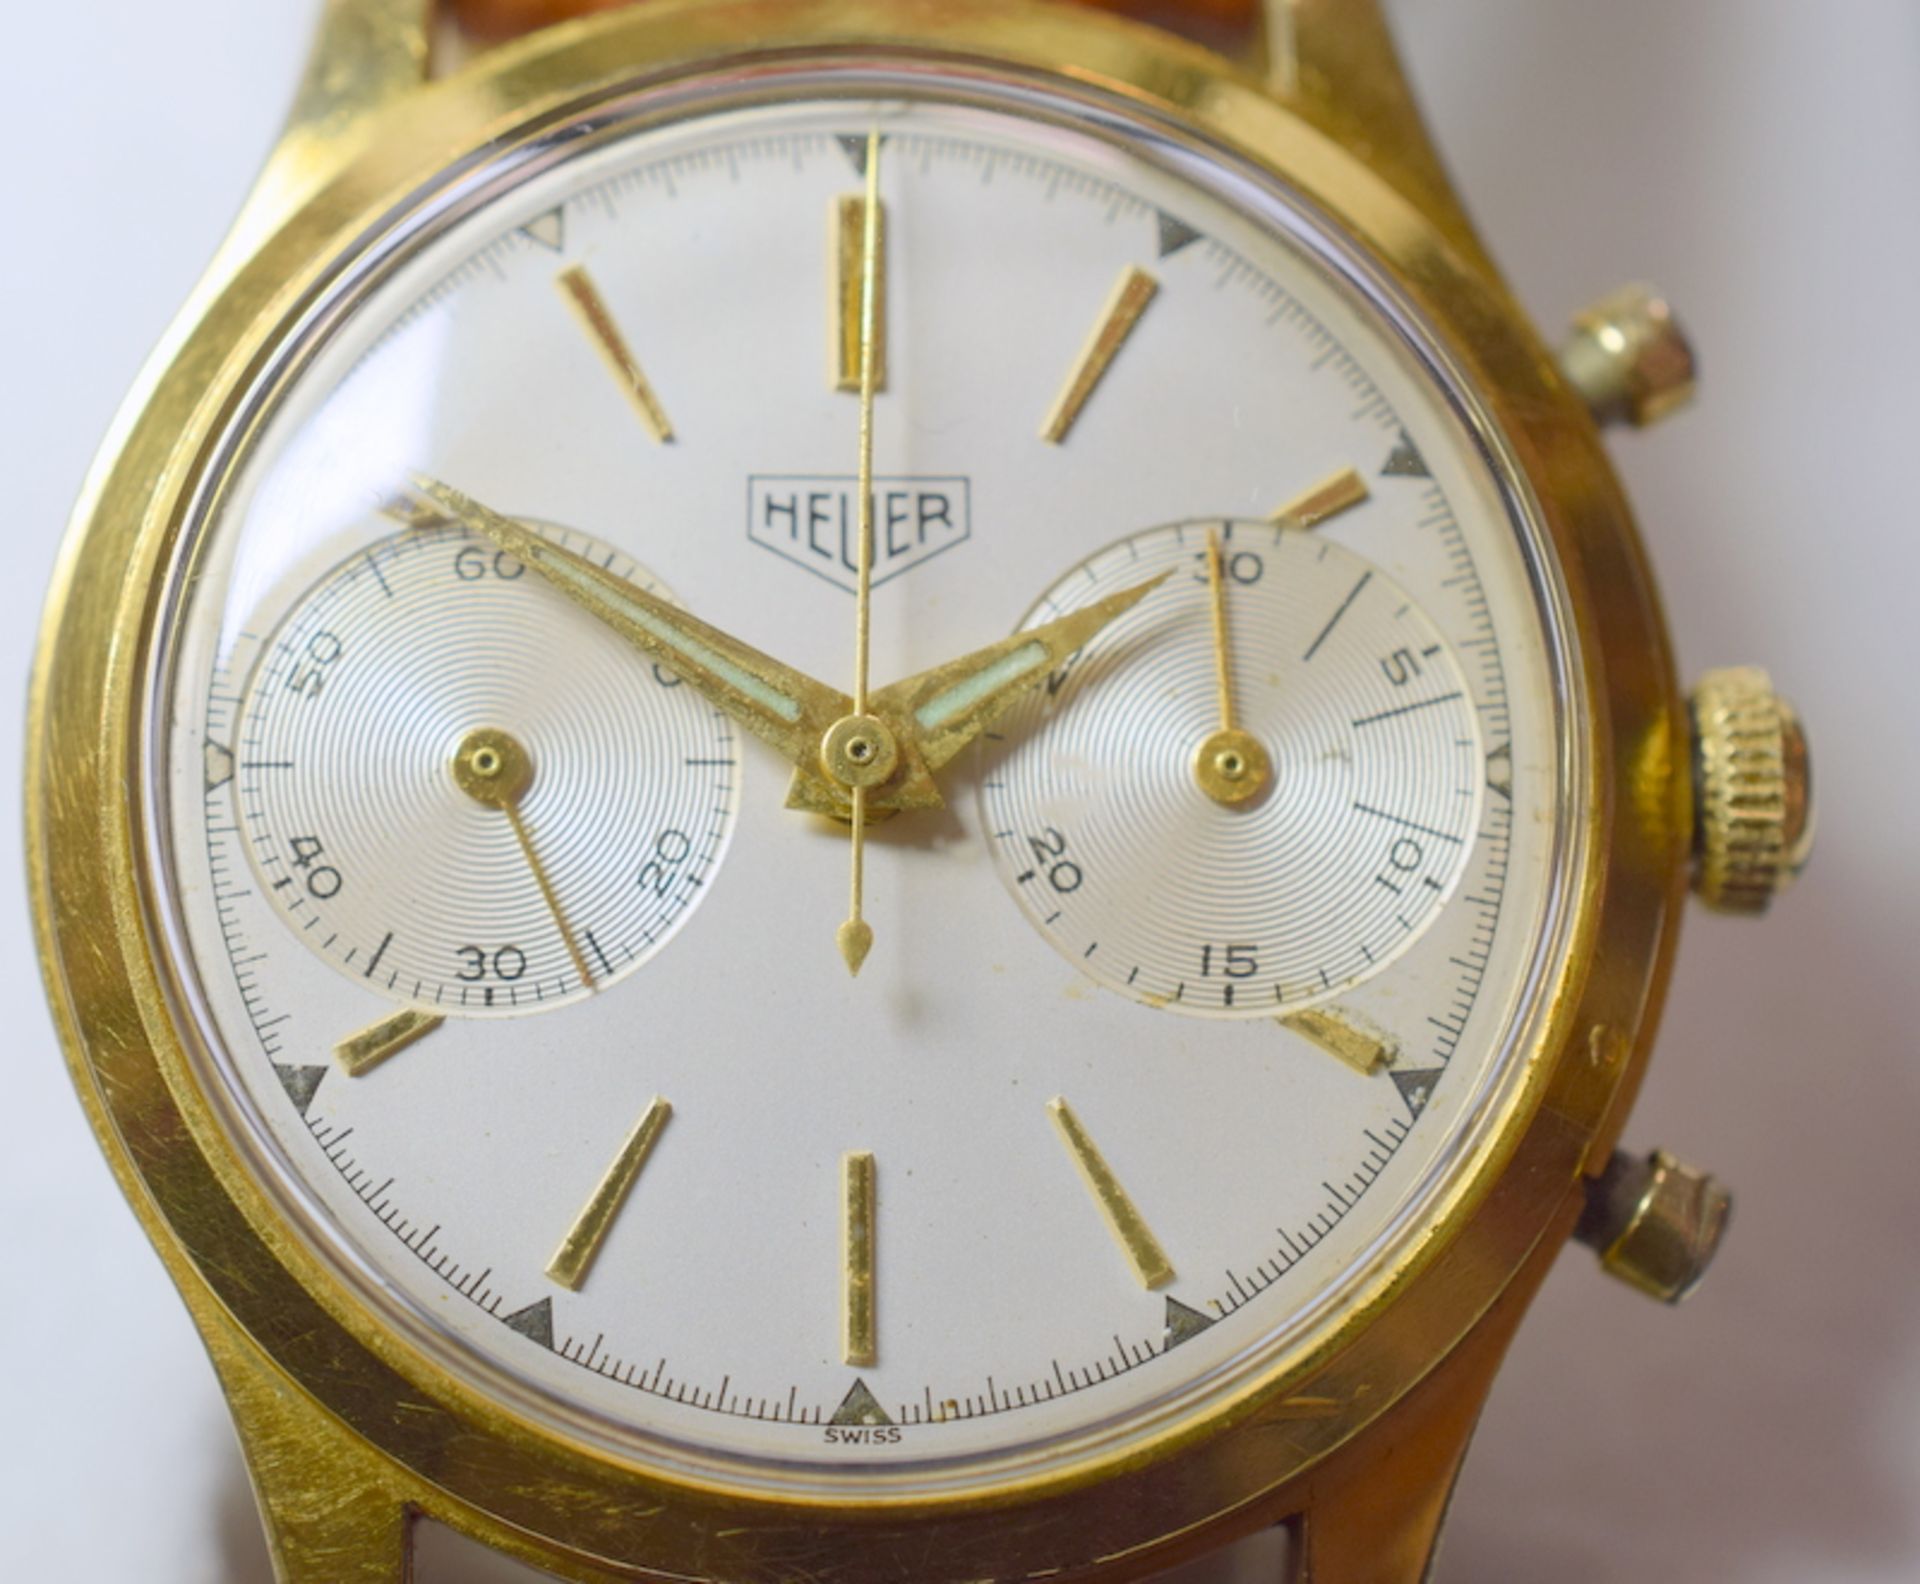 Lovely Heuer Chronograph c1960s Ed.Heuer Signed Movement ***reserve lowered*** - Image 6 of 7